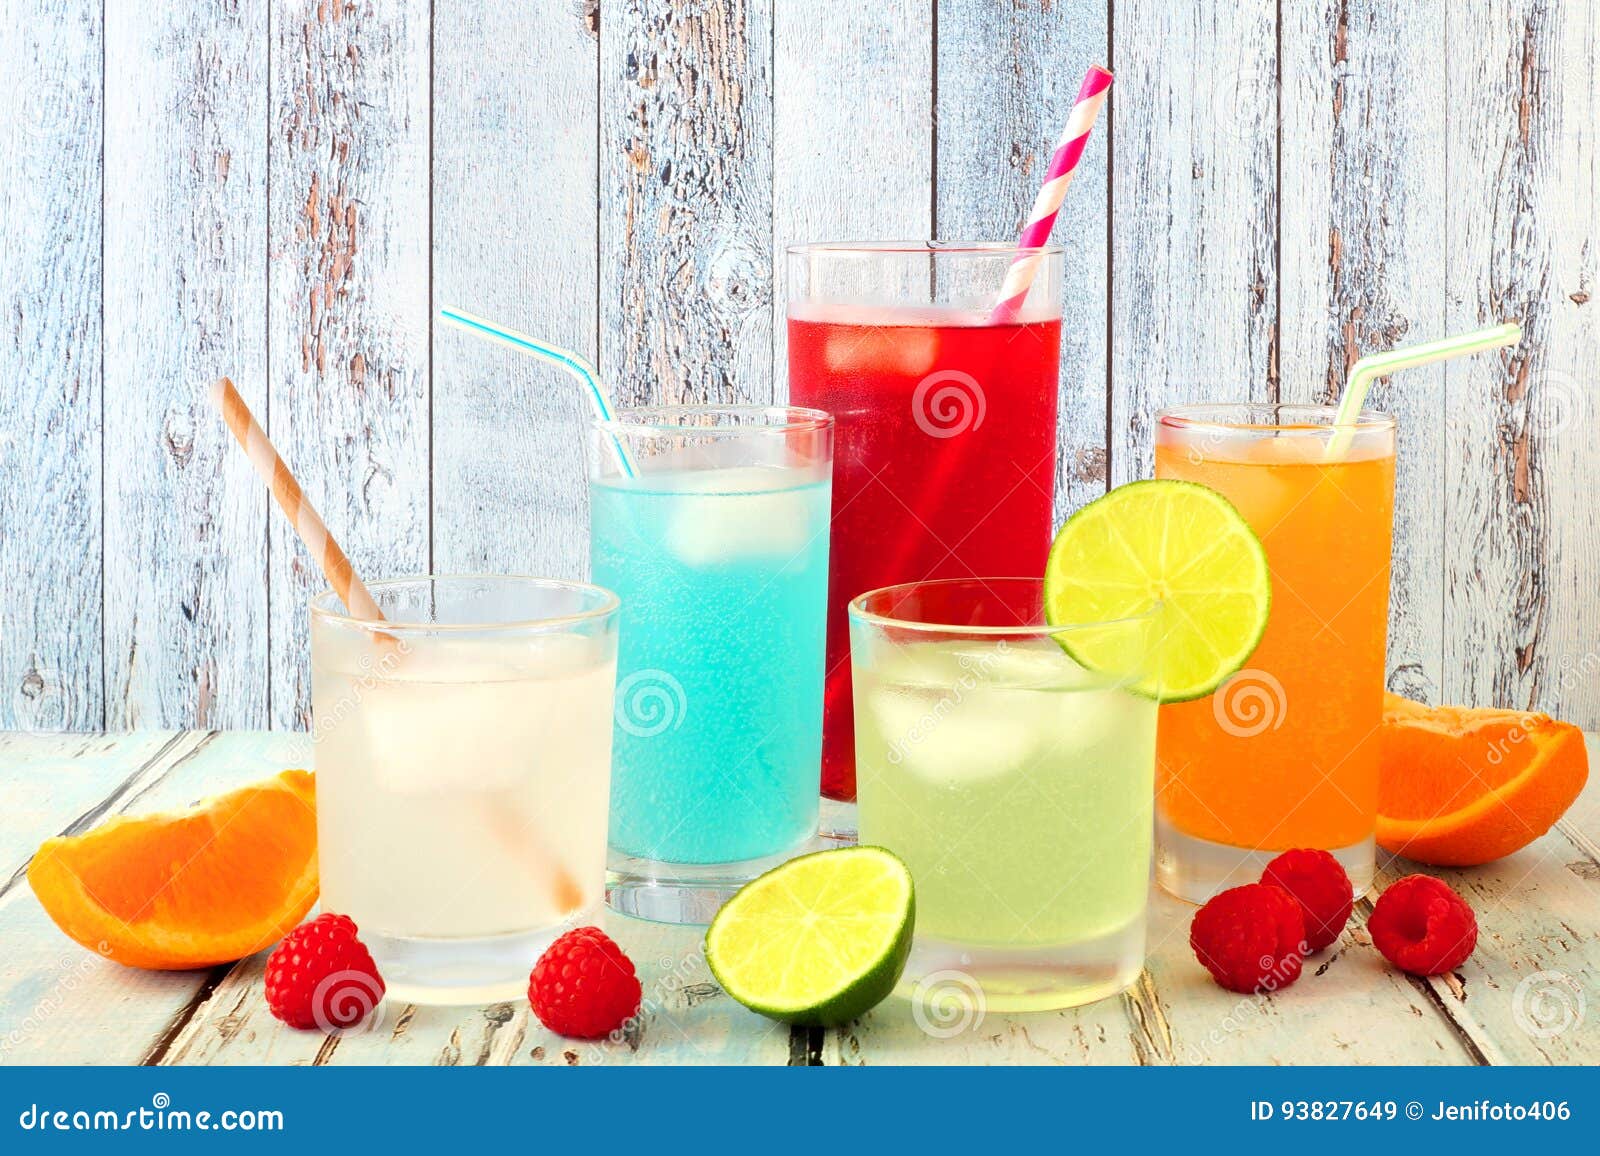 cool colorful summer drinks against rustic wood